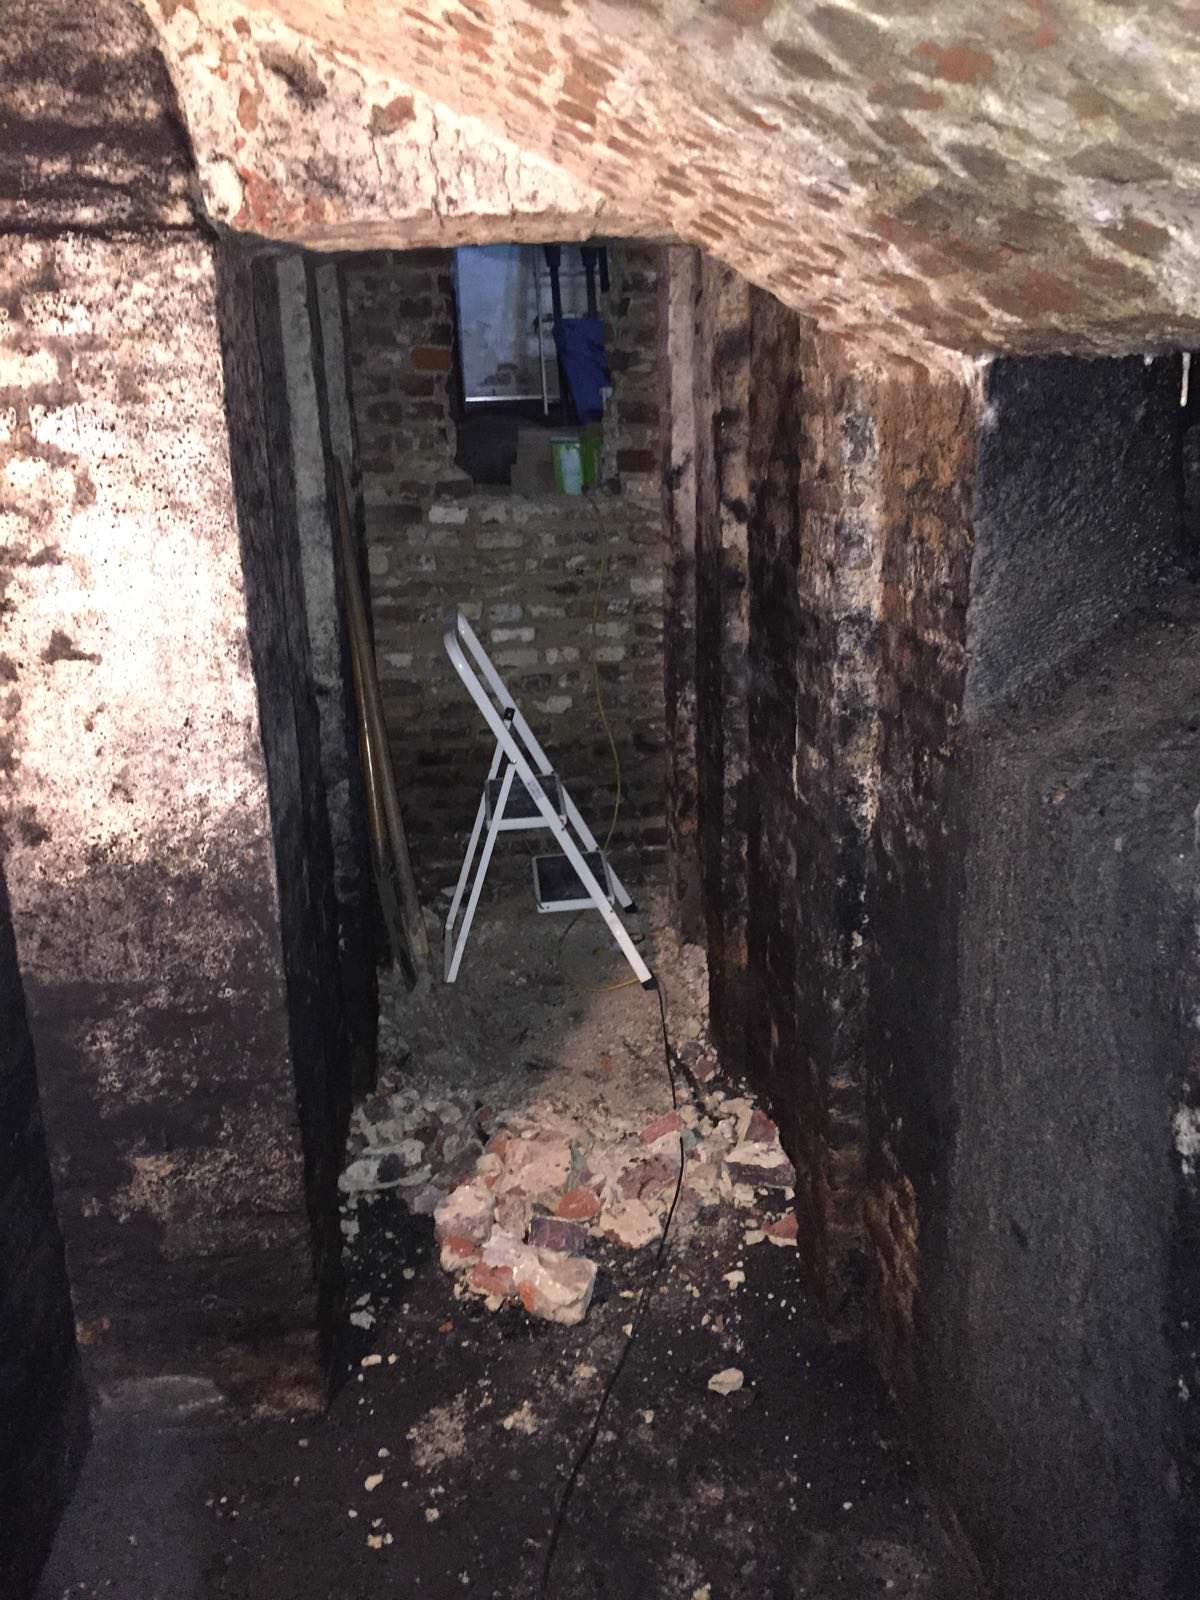 "Other side at the back of the wall inside the corridor. At the right hand side you can see what is now determined as a coal chute. edit : the blackness on the walls is leftover residue from the coals. You can also see the wall is totally covered where they poured the coals in (on the right side)."